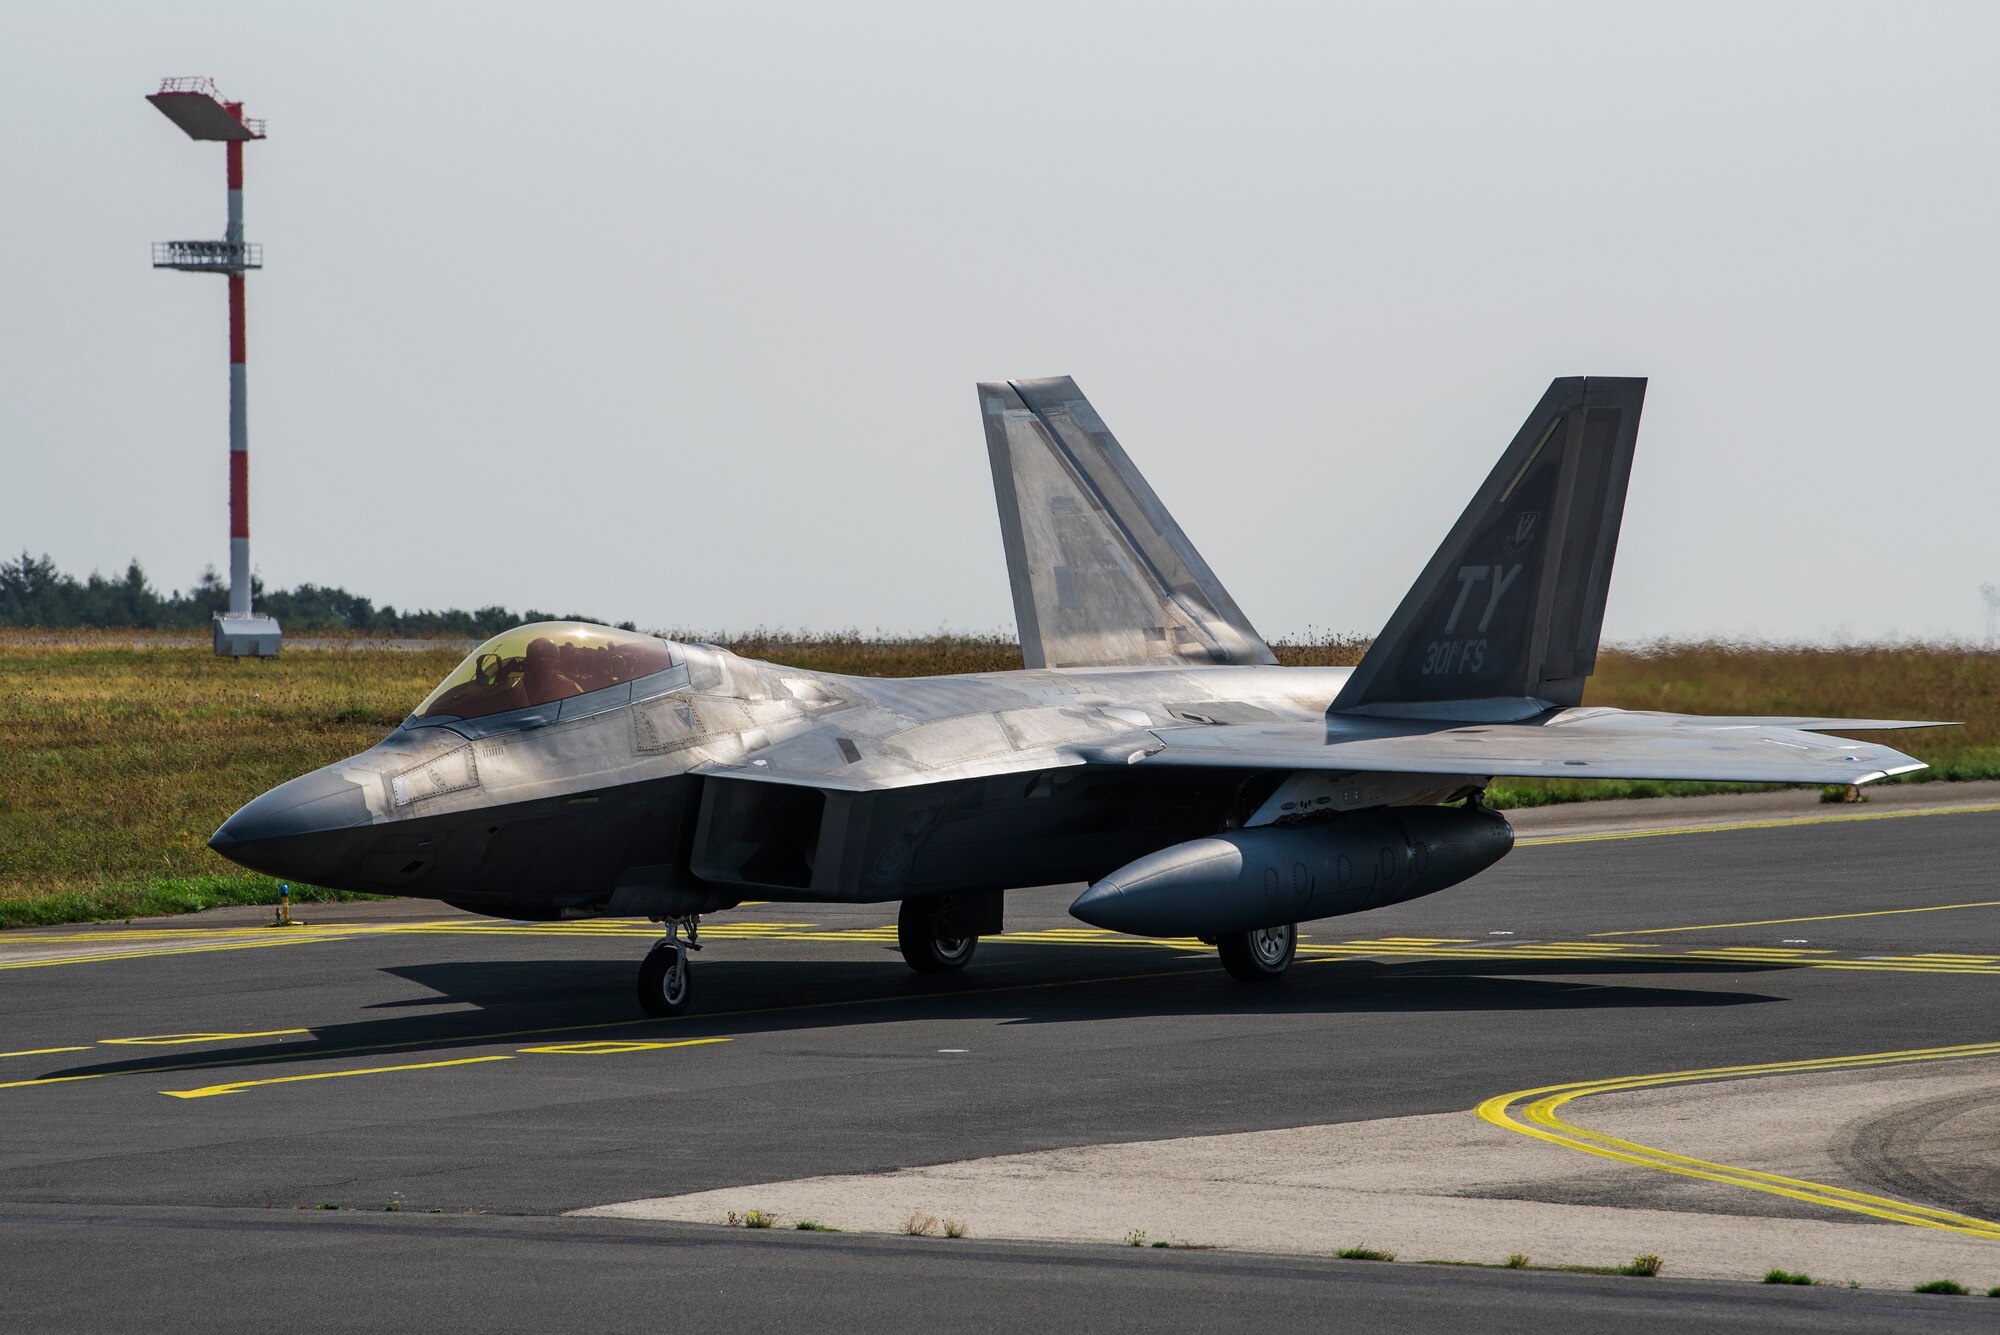 A U.S. Air Force F-22 Raptor from the 95th Fighter Squadron, 325th Fighter Wing, Tyndall Air Force Base, Fla., taxis on the flightline at Spangdahlem Air Base, Germany, Aug. 29, 2018. The Raptor prepared to depart after being deployed to Europe as a part of the European Deterrence Initiative, assuring allies of the Air Force's commitment to European security and stability. (U.S. Air Force photo by Airman 1st Class Valerie Seelye)